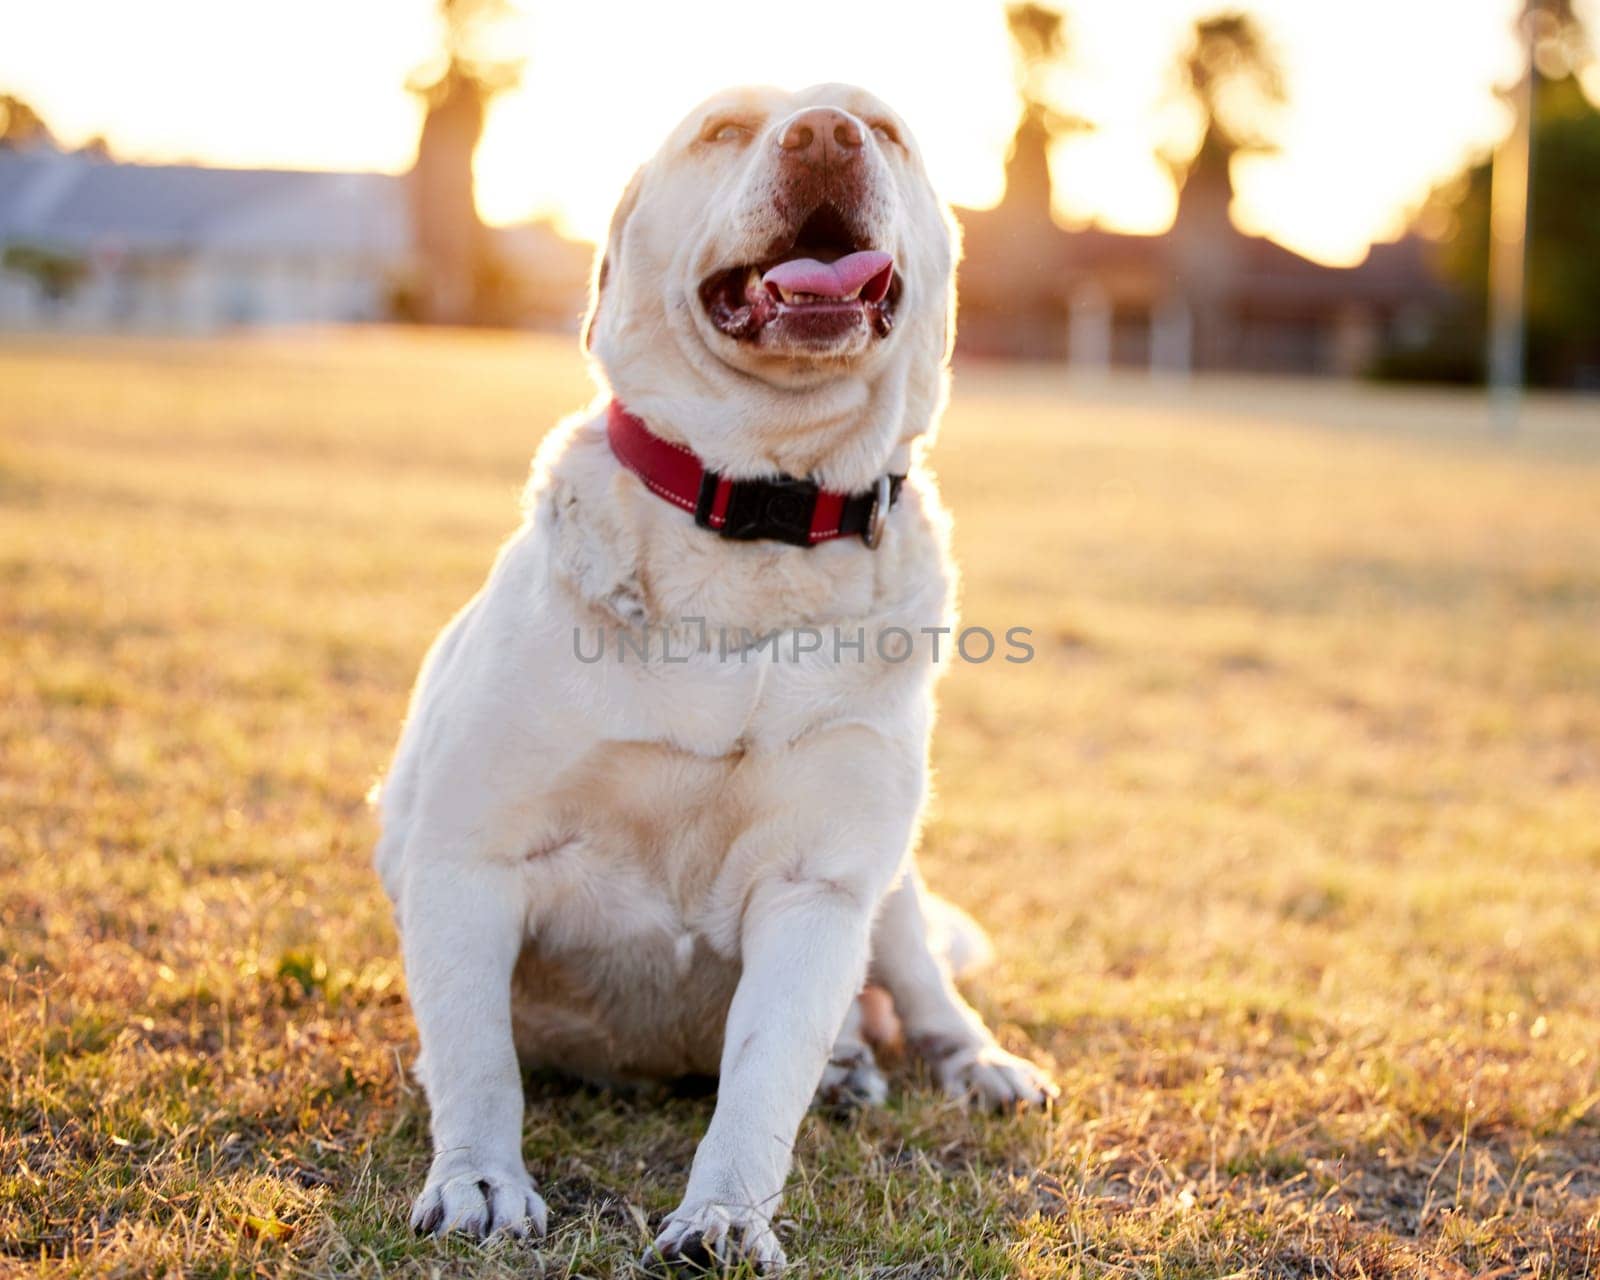 Dog, grass and park with collar for obedience training, pet sports and walking. Labrador, lawn and leash on field or backyard for exercise, workout and fun with sunset, flare and bark in summer.